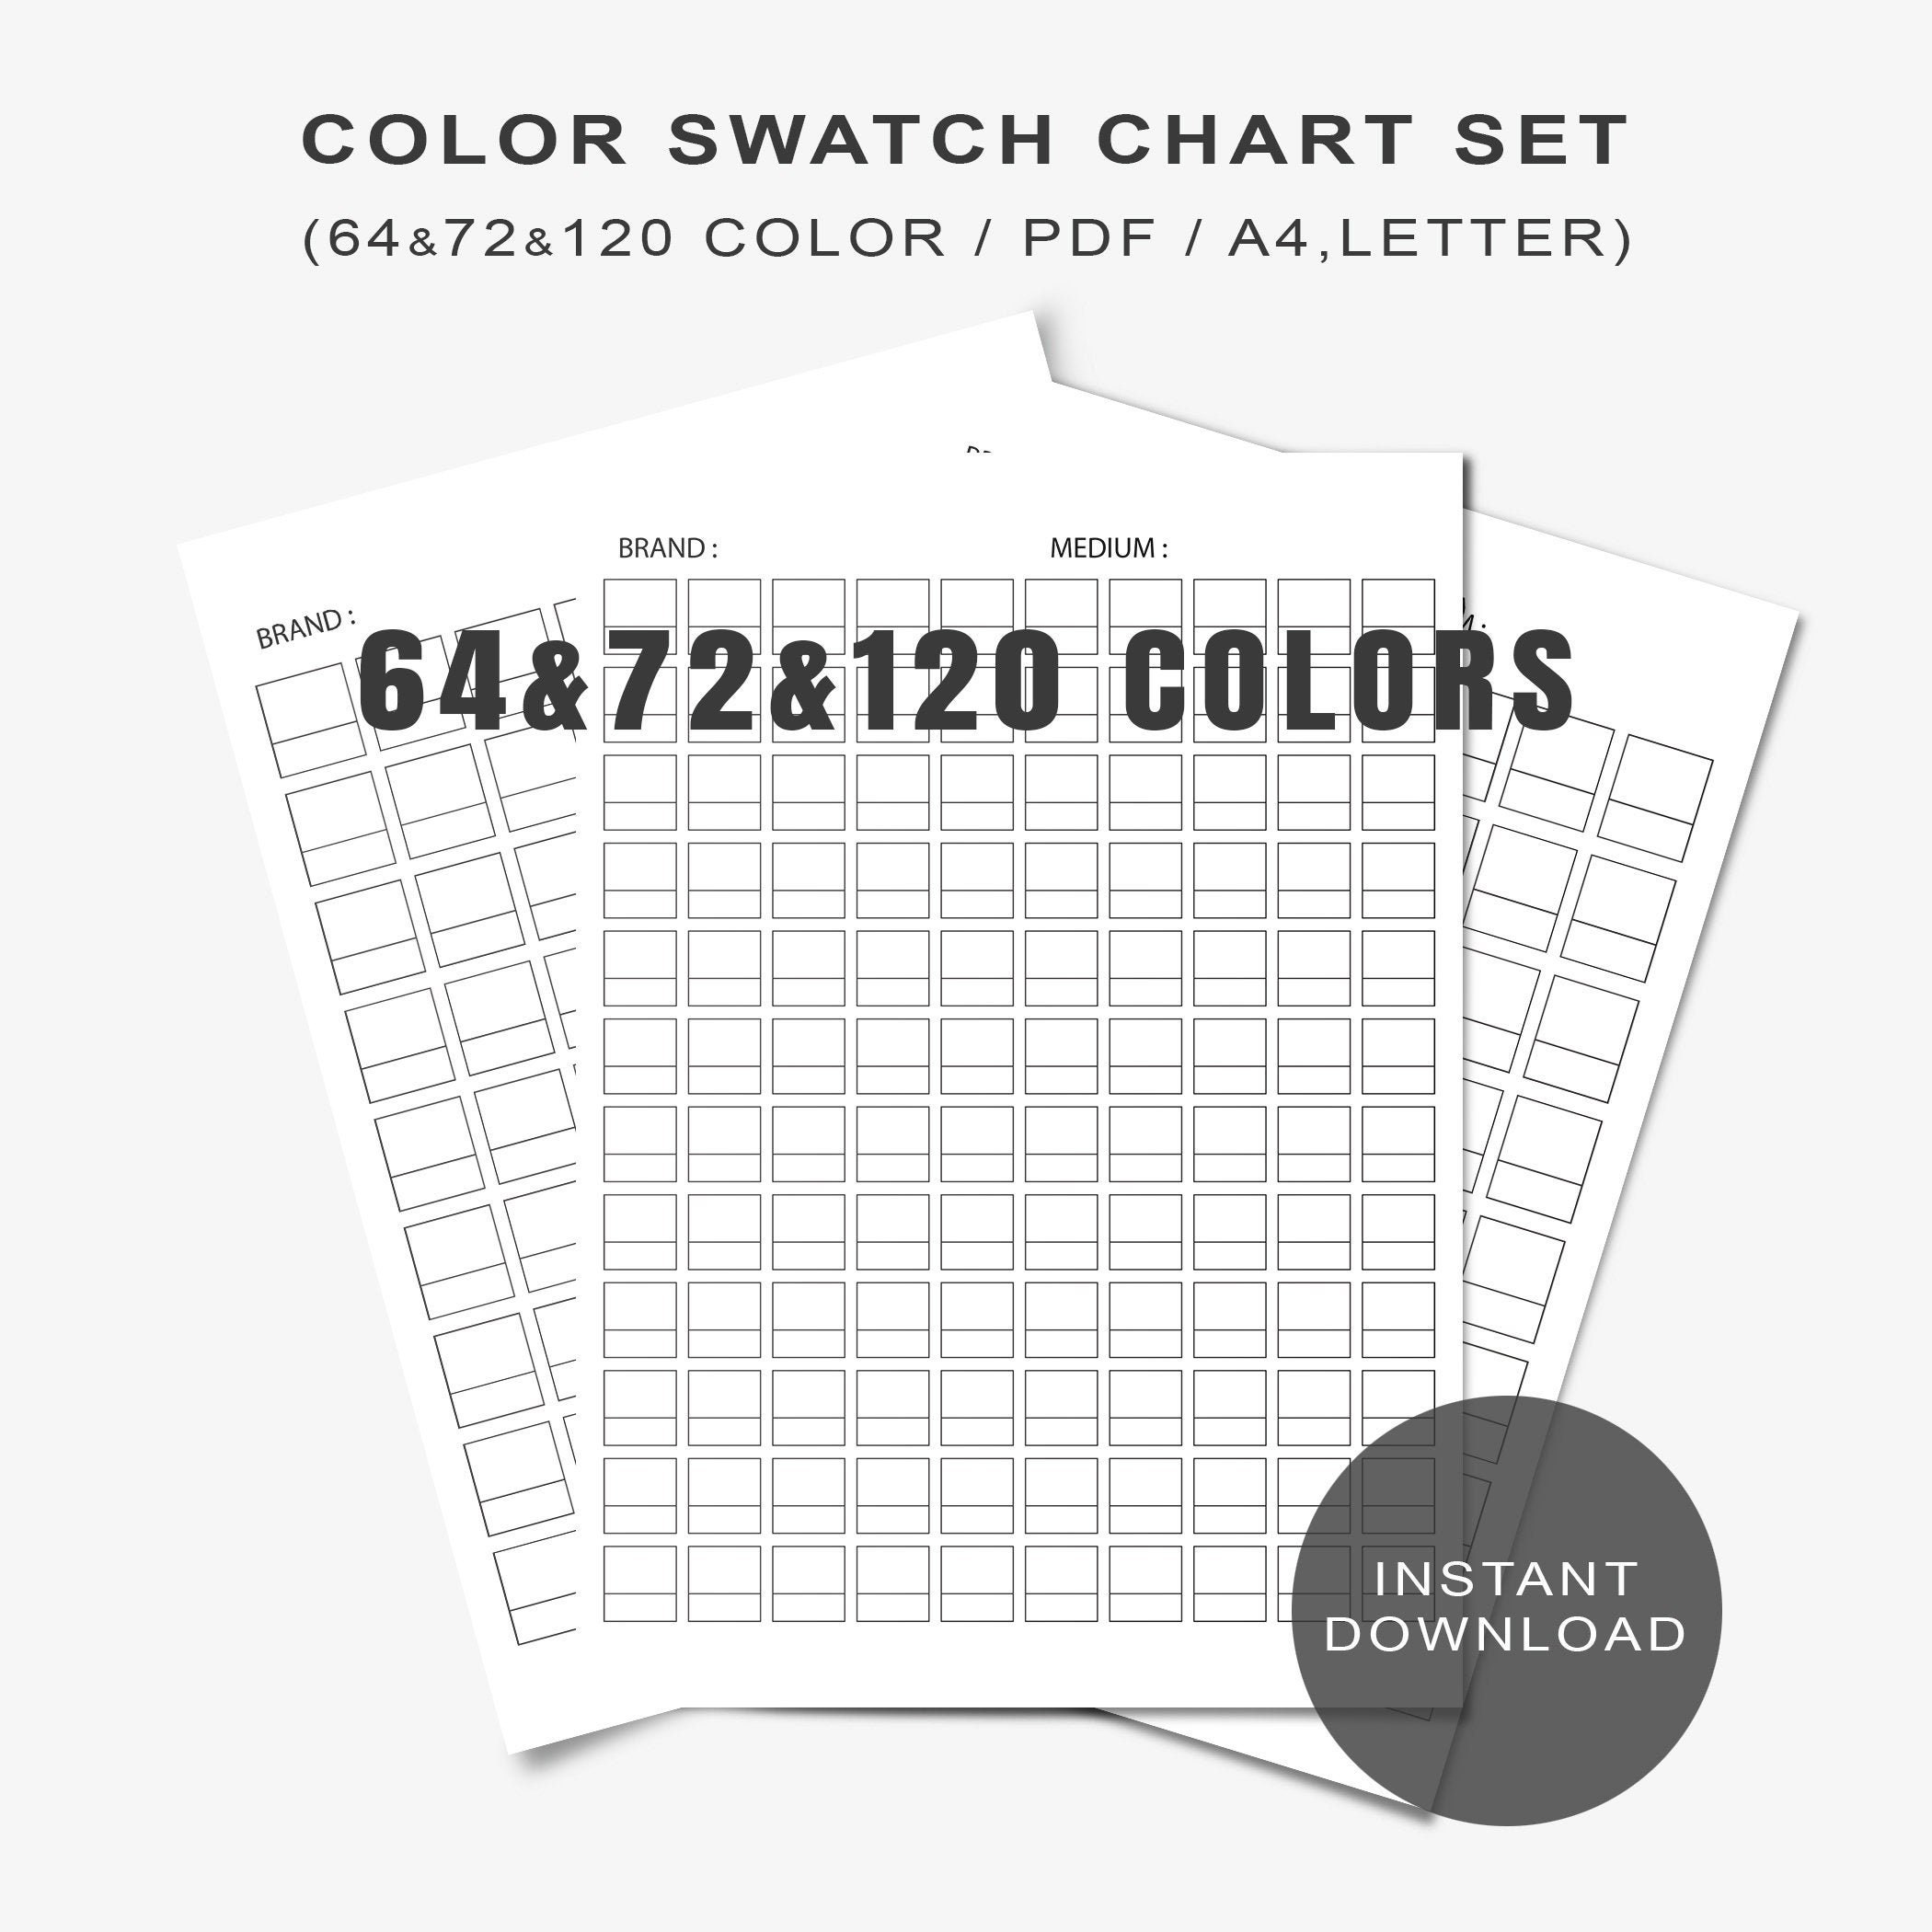 Swatch Size Chart